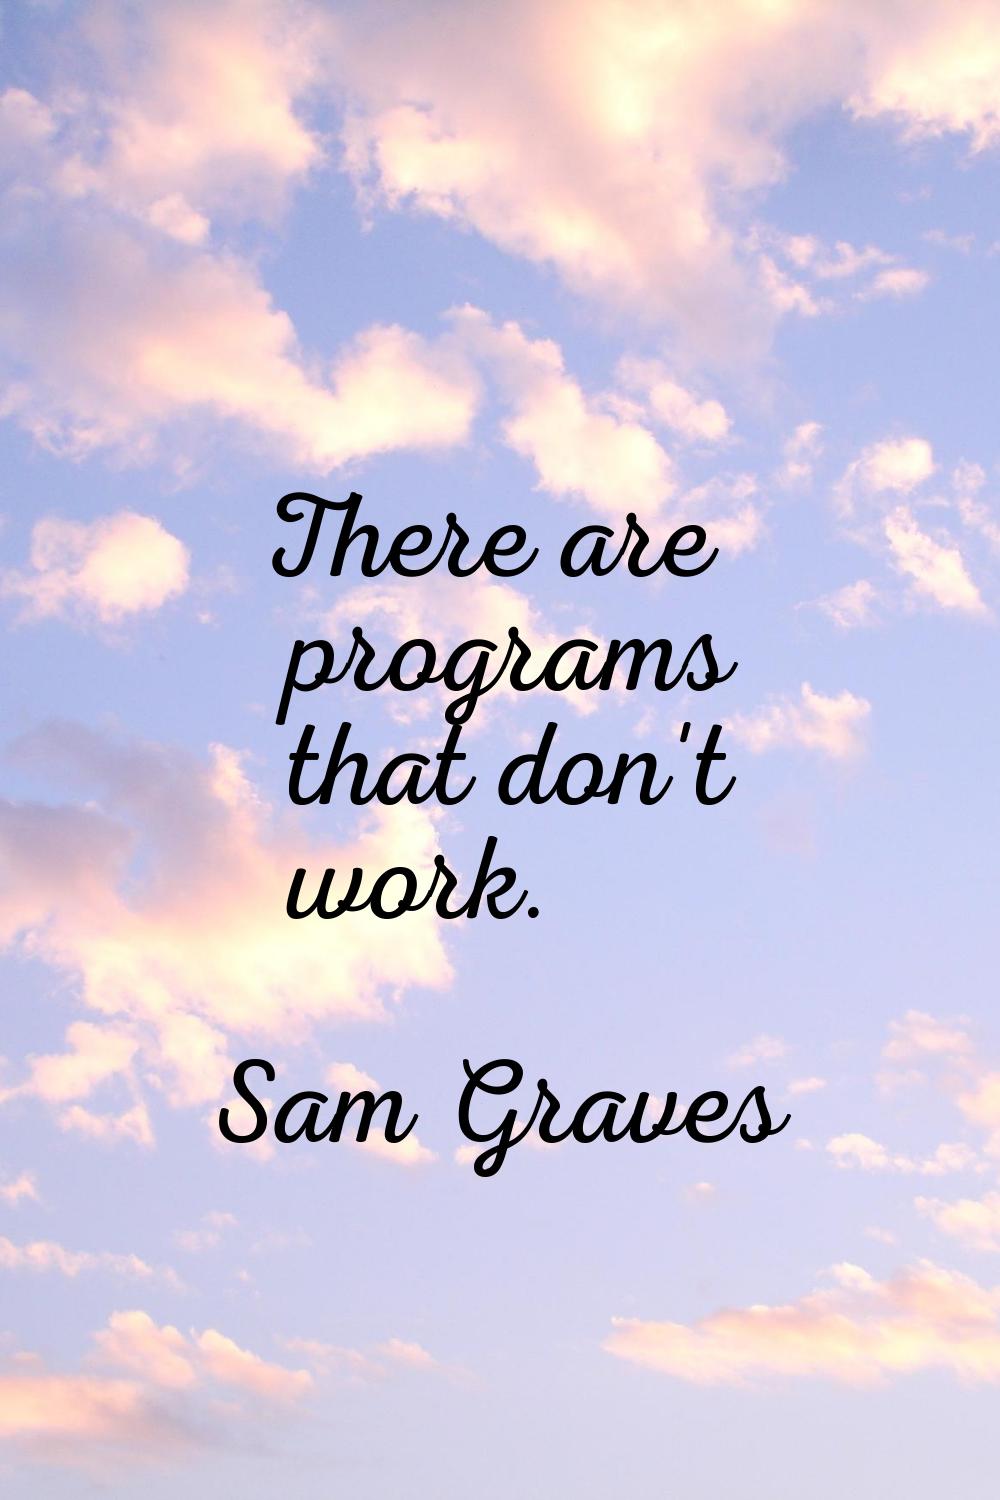 There are programs that don't work.